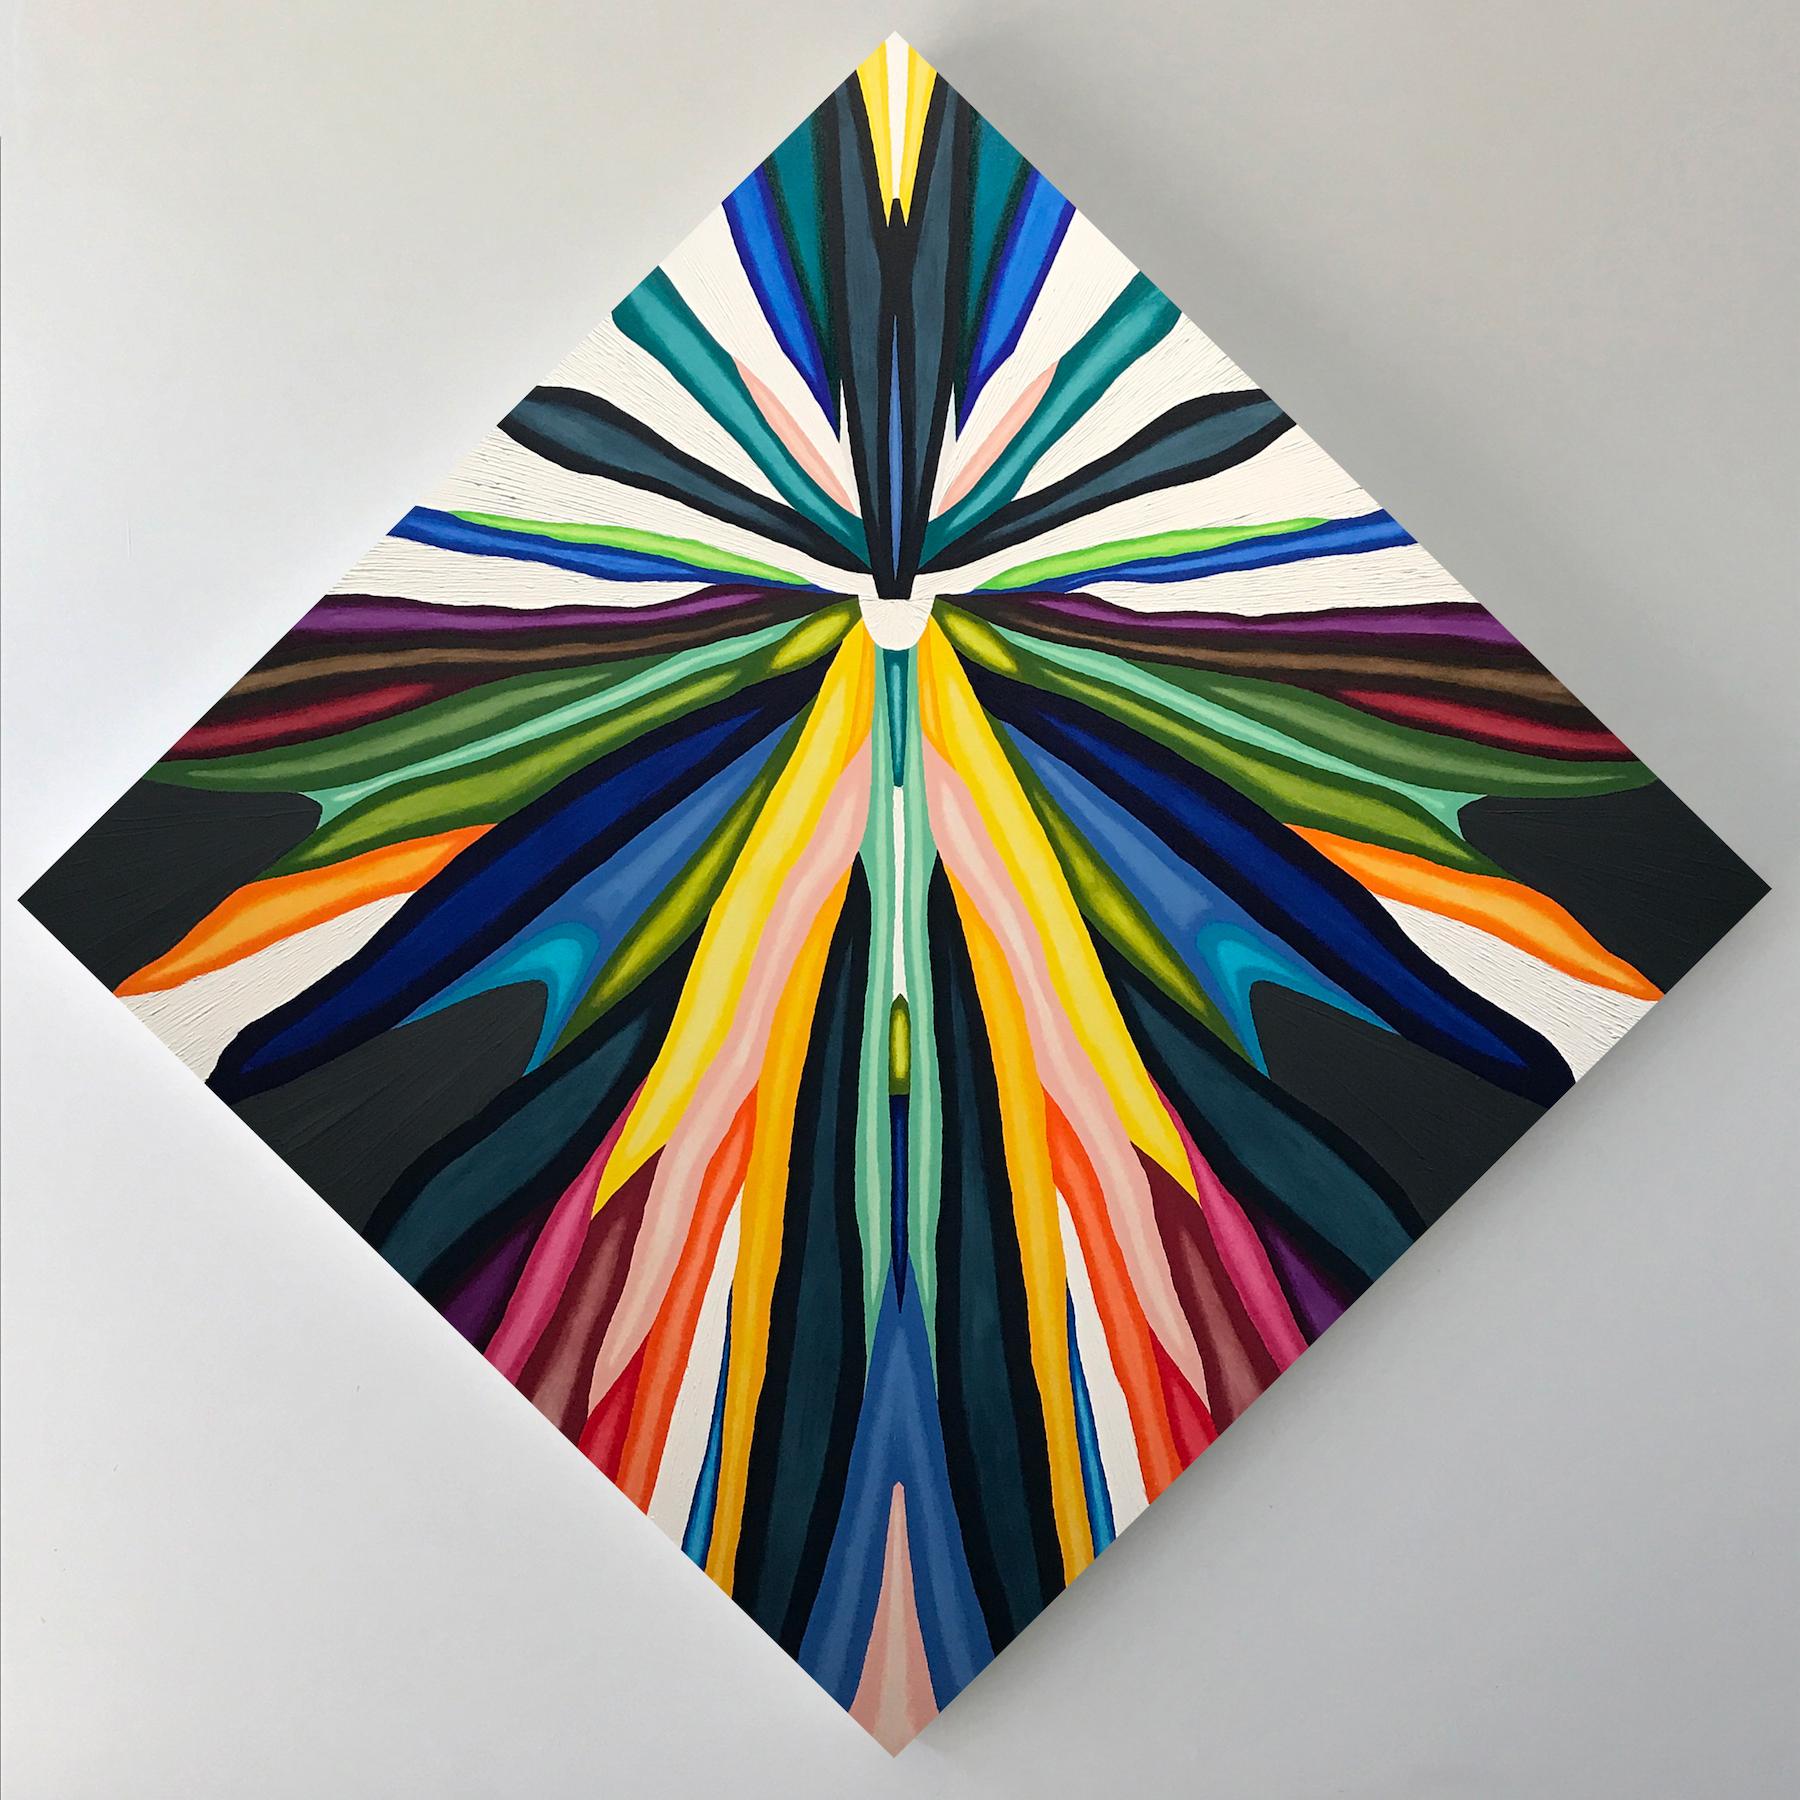 "Mantes" Large Colorful Diamond Contemporary Abstract Painting on Canvas - Art by Lee Clarke